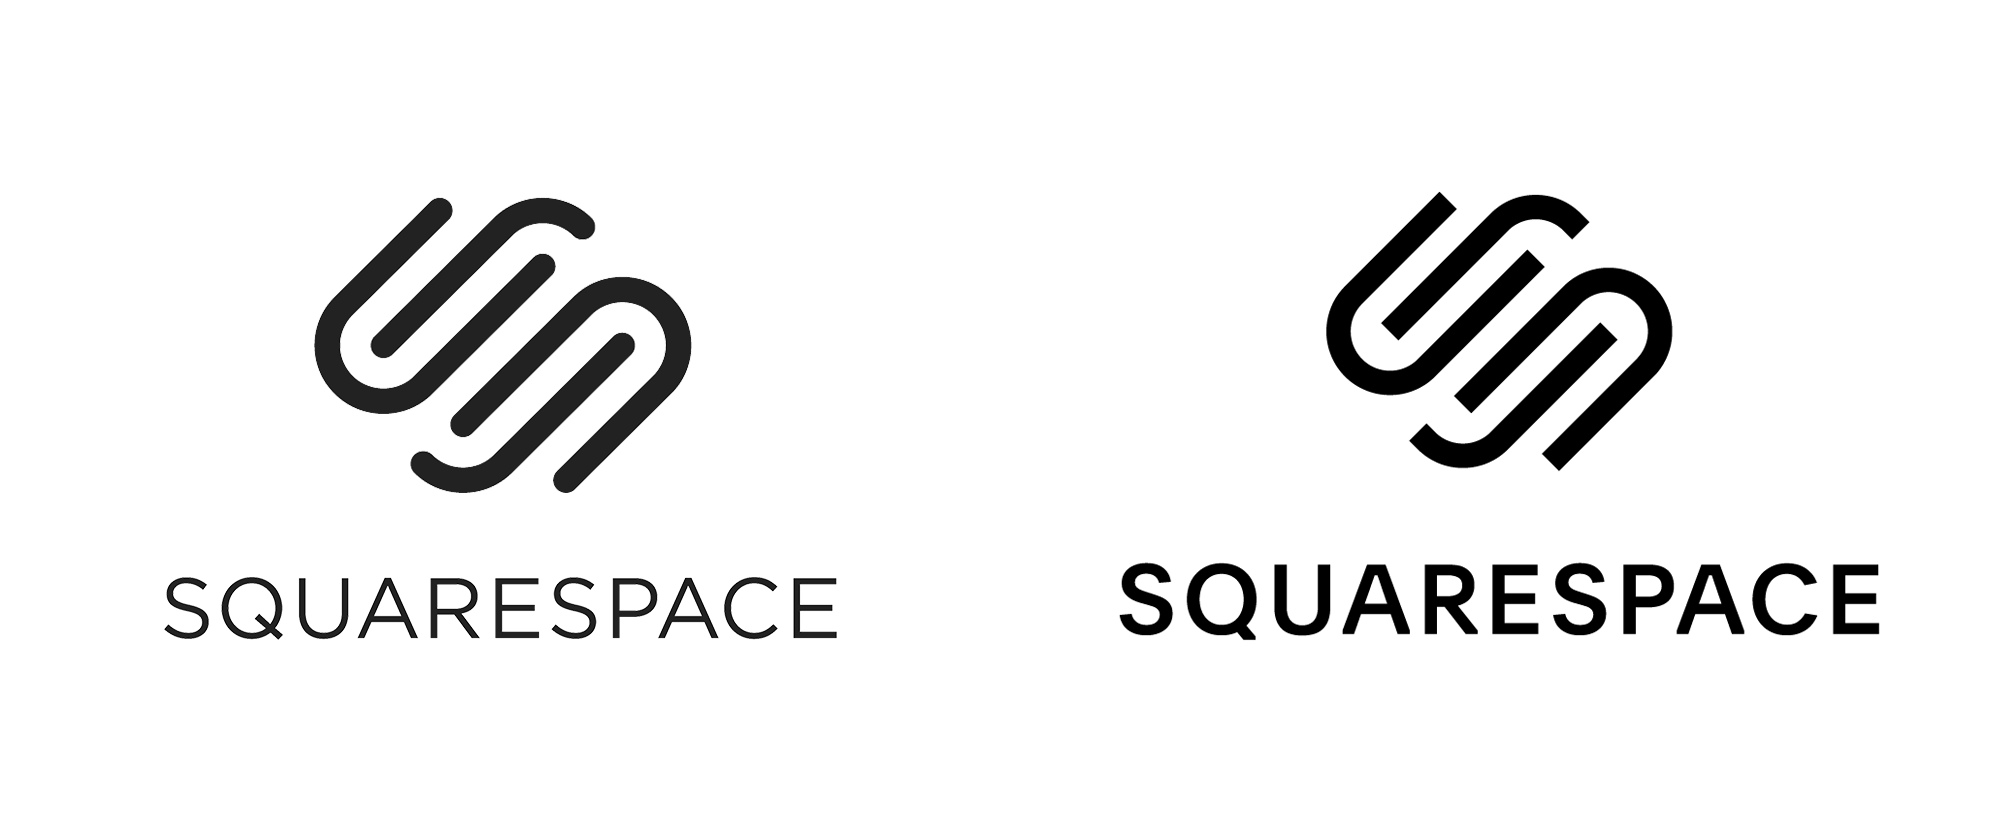 Squarespace Logo - Brand New: New Logo and Identity for Squarespace